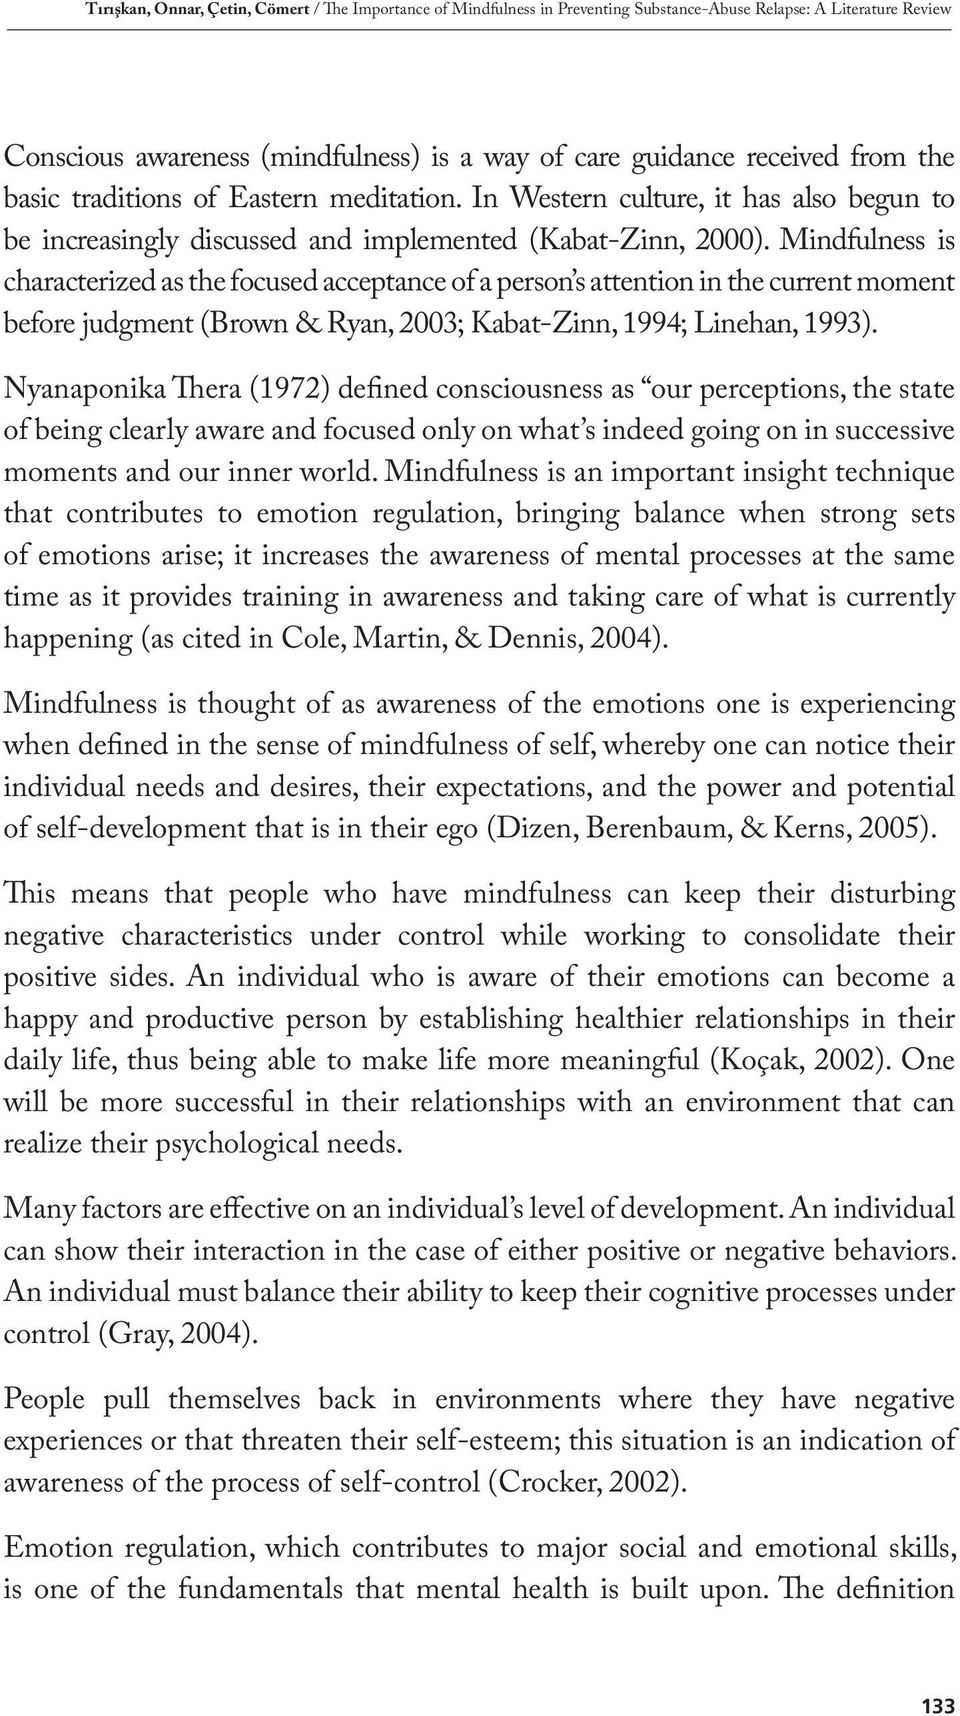 Mindfulness is characterized as the focused acceptance of a person s attention in the current moment before judgment (Brown & Ryan, 2003; Kabat-Zinn, 1994; Linehan, 1993).